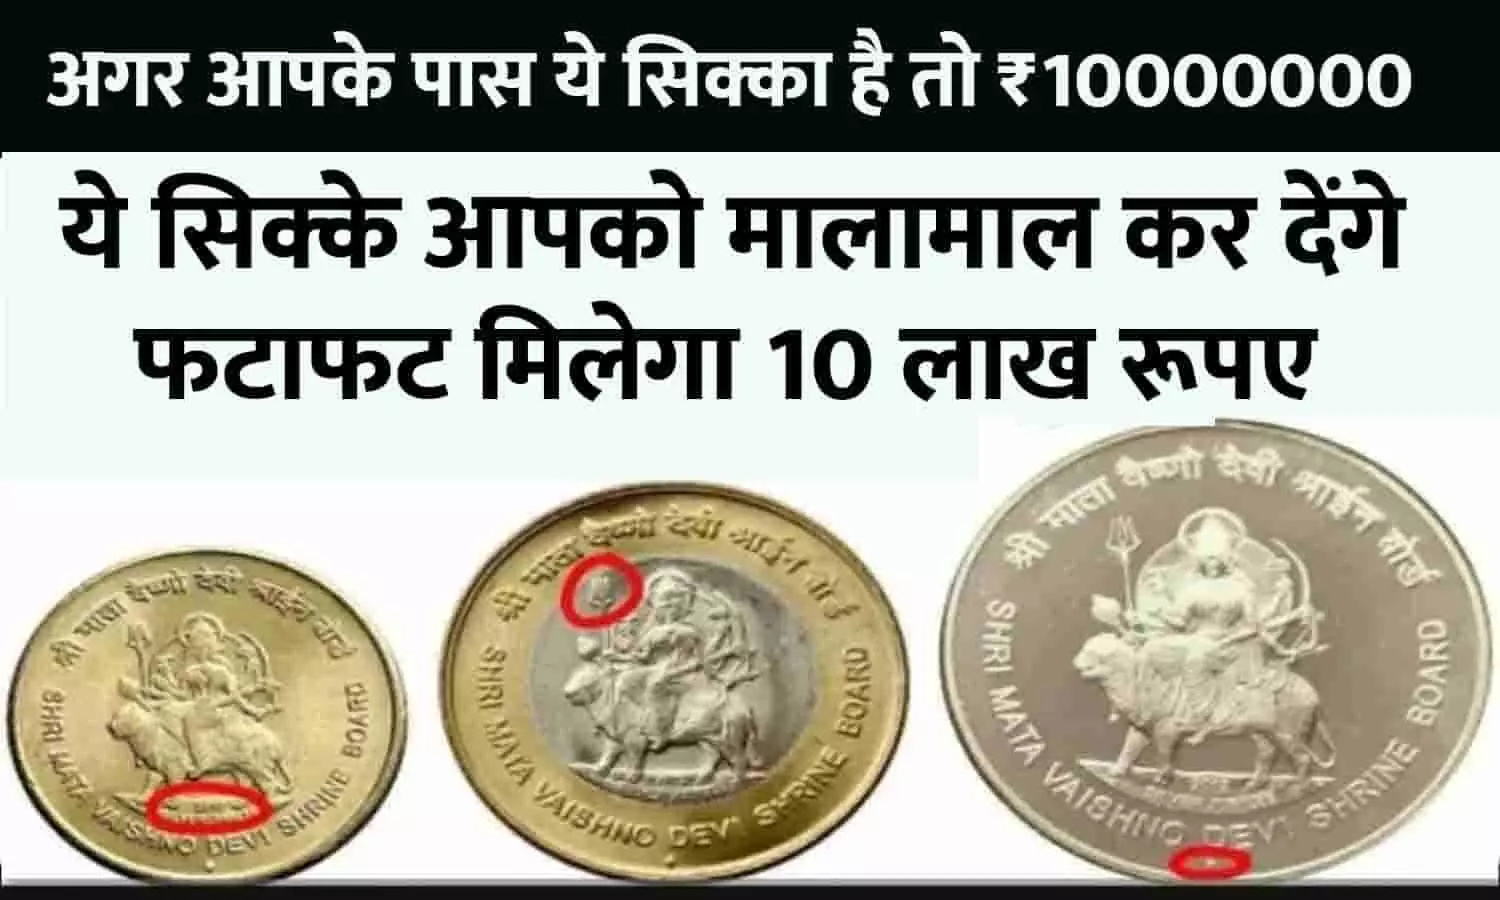 Vaishno Devi Old 5 Rupees Coin